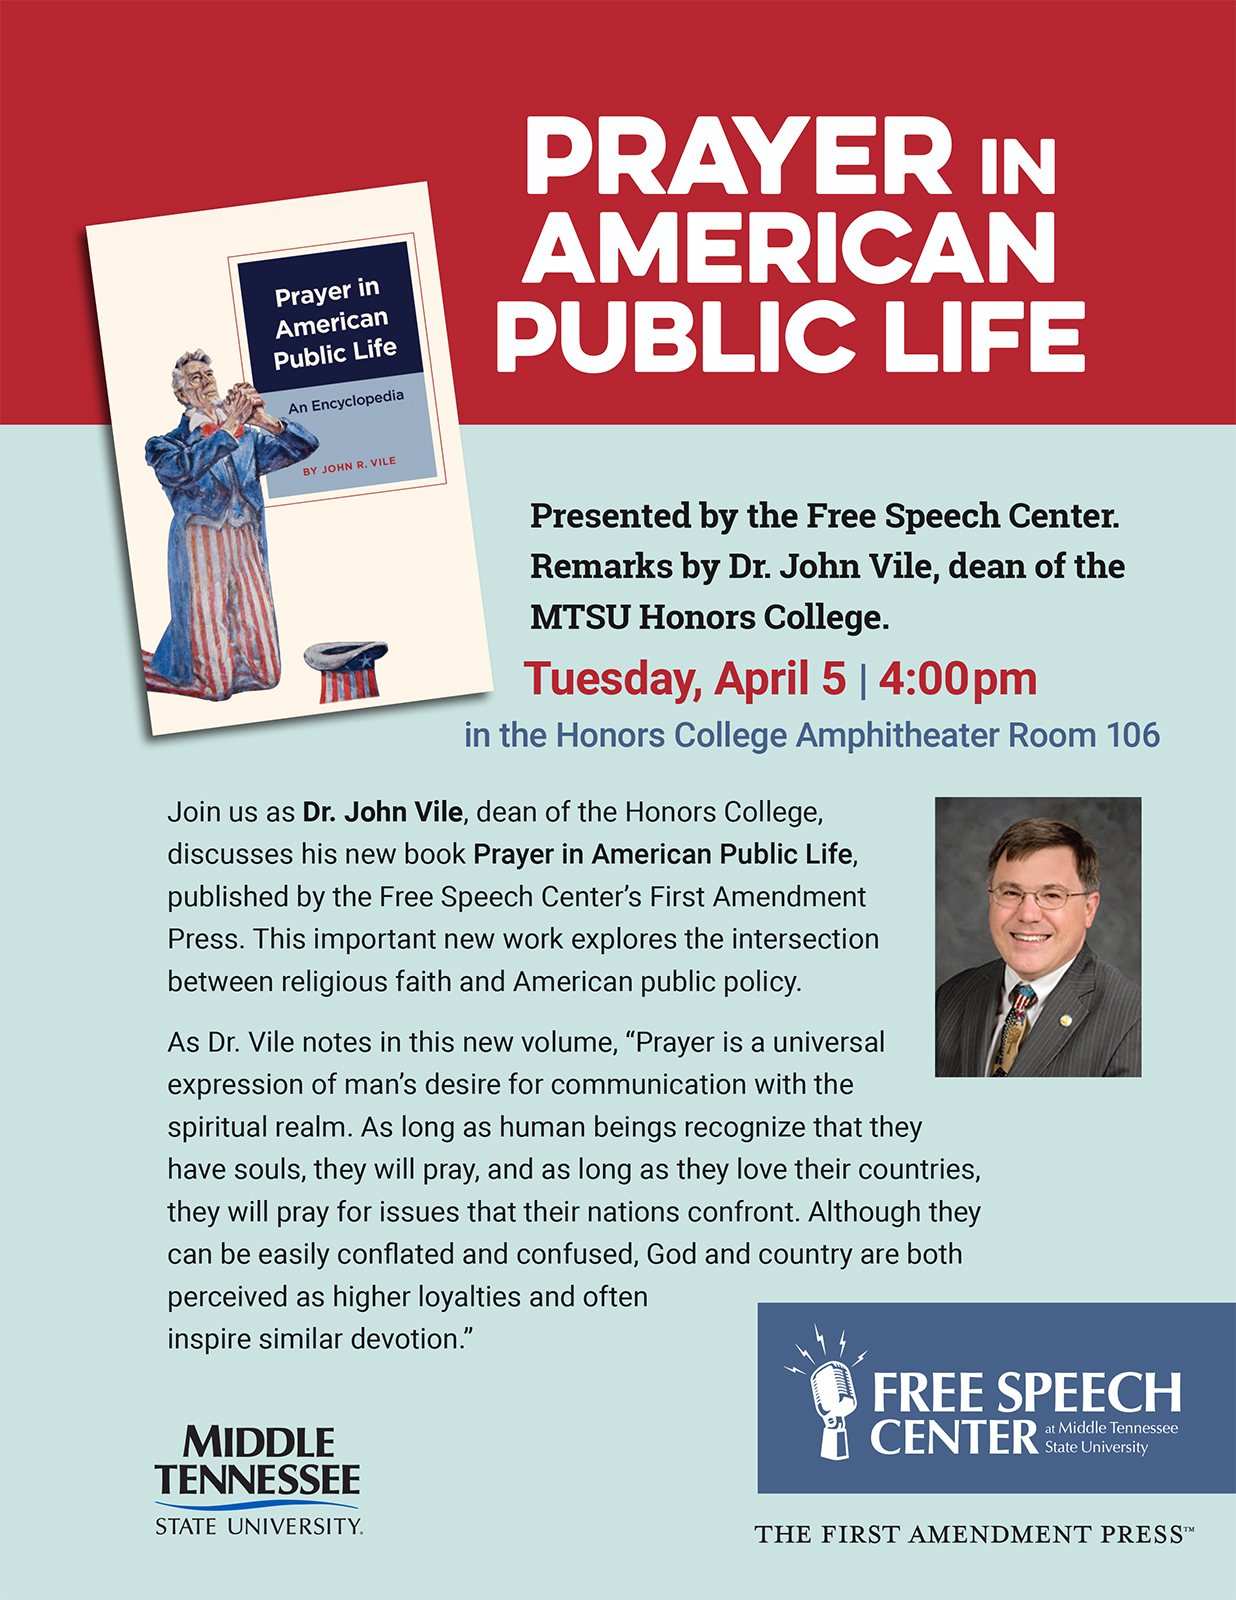 poster for April 4 MTSU public lecture, "Prayer in American Public Life," with Constitutional scholar John Vile, dean of the University Honors College at Middle Tennessee State University, and presented by the Free Speech Center at MTSU